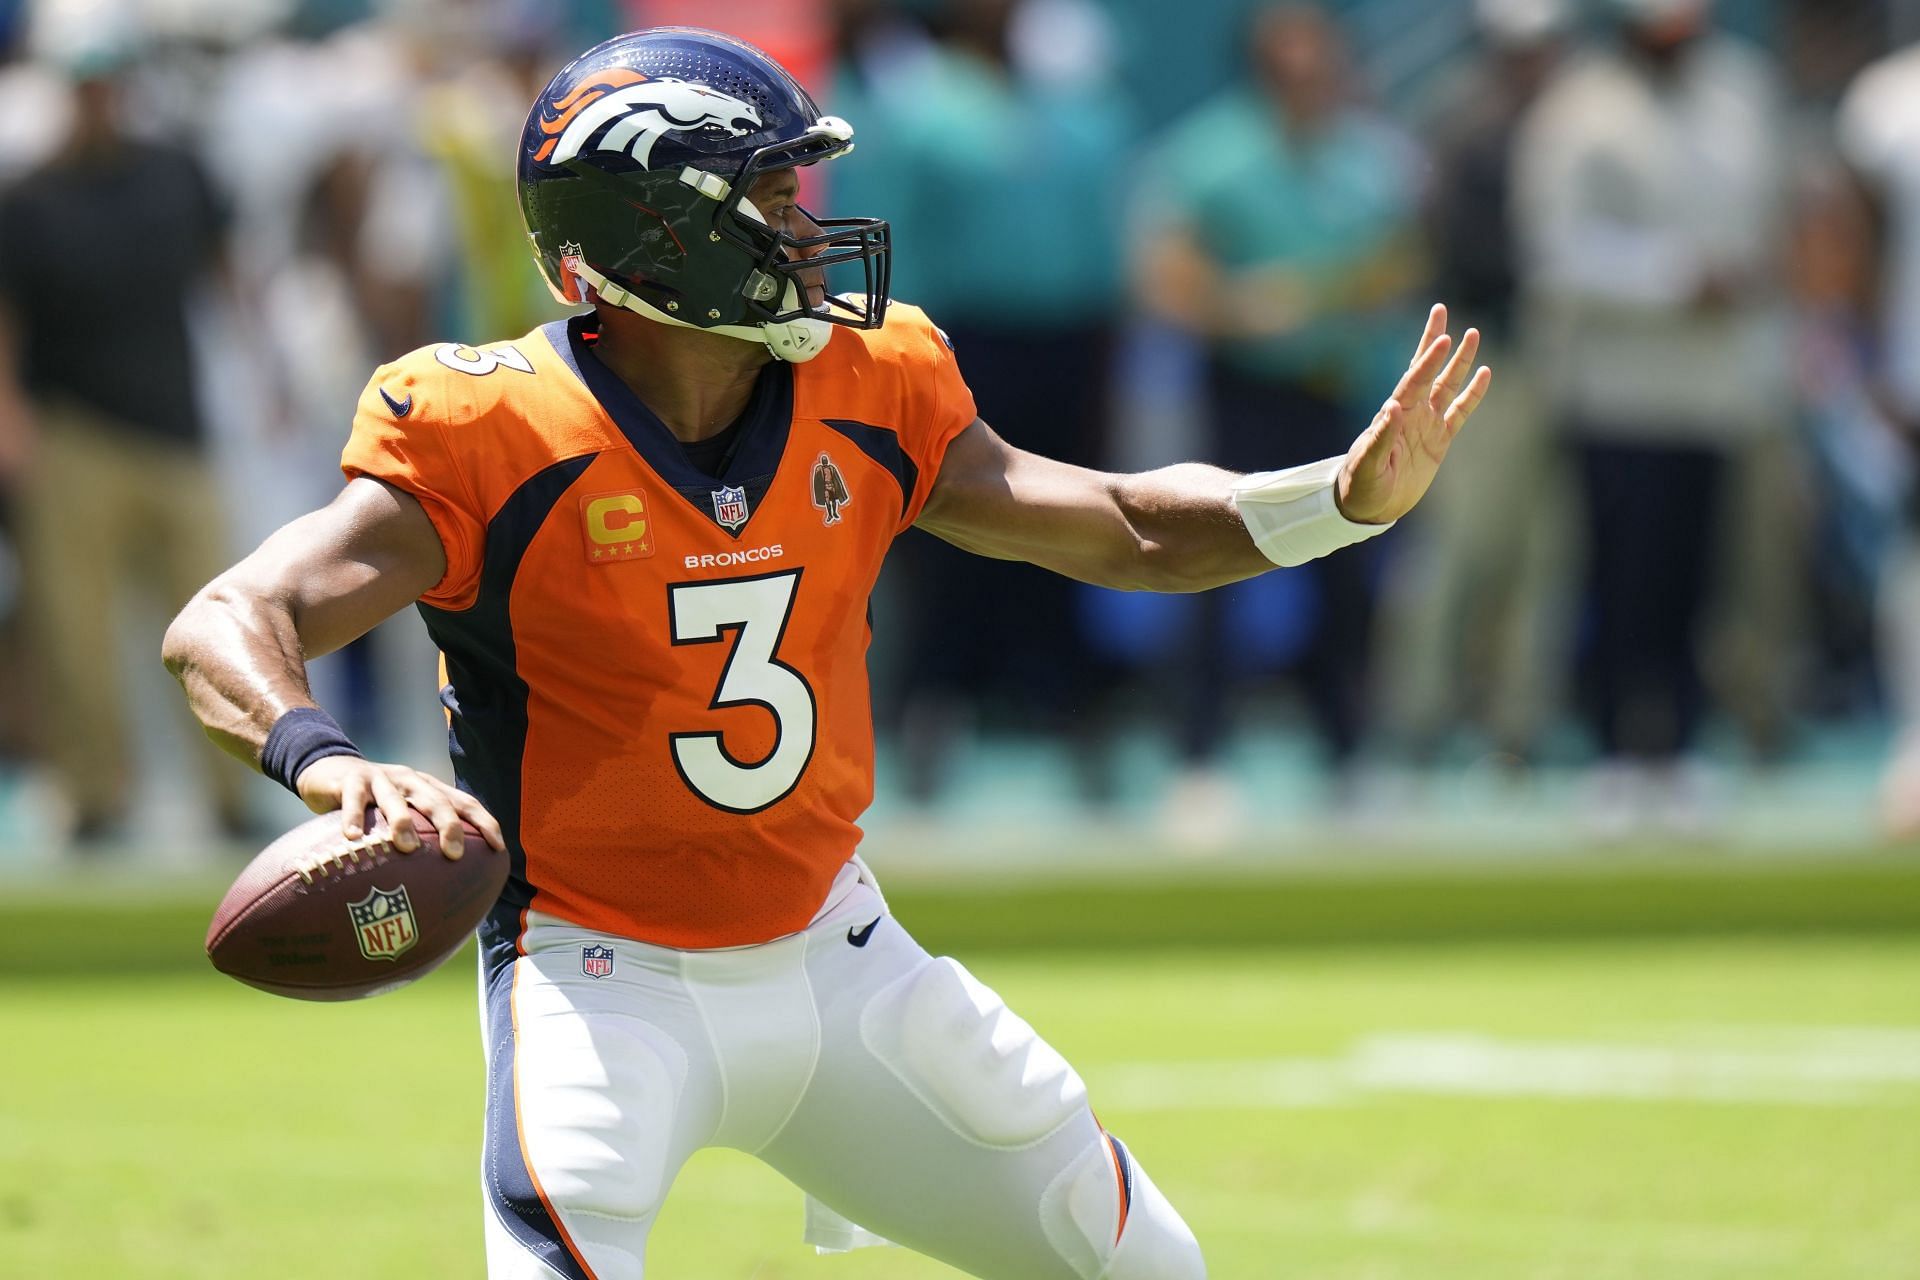 Broncos vs Bears weather report: What's in story for Week 4?